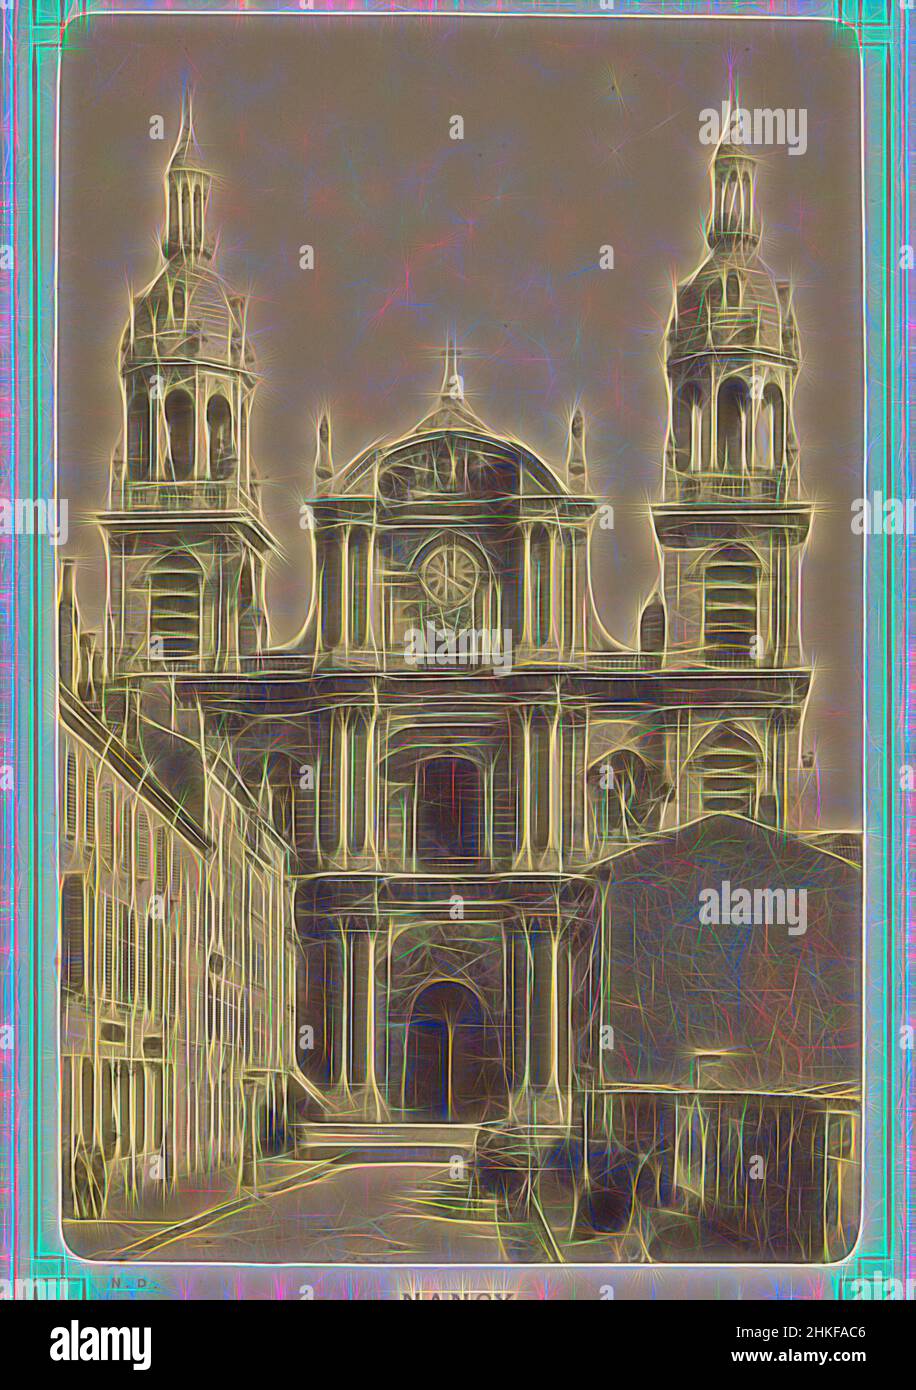 Inspired by Cathedral of Nancy, La Cathédrale, Nancy, Étienne Neurdein, Nancy, 1870 - 1900, albumen print, height 163 mm × width 109 mm, Reimagined by Artotop. Classic art reinvented with a modern twist. Design of warm cheerful glowing of brightness and light ray radiance. Photography inspired by surrealism and futurism, embracing dynamic energy of modern technology, movement, speed and revolutionize culture Stock Photo